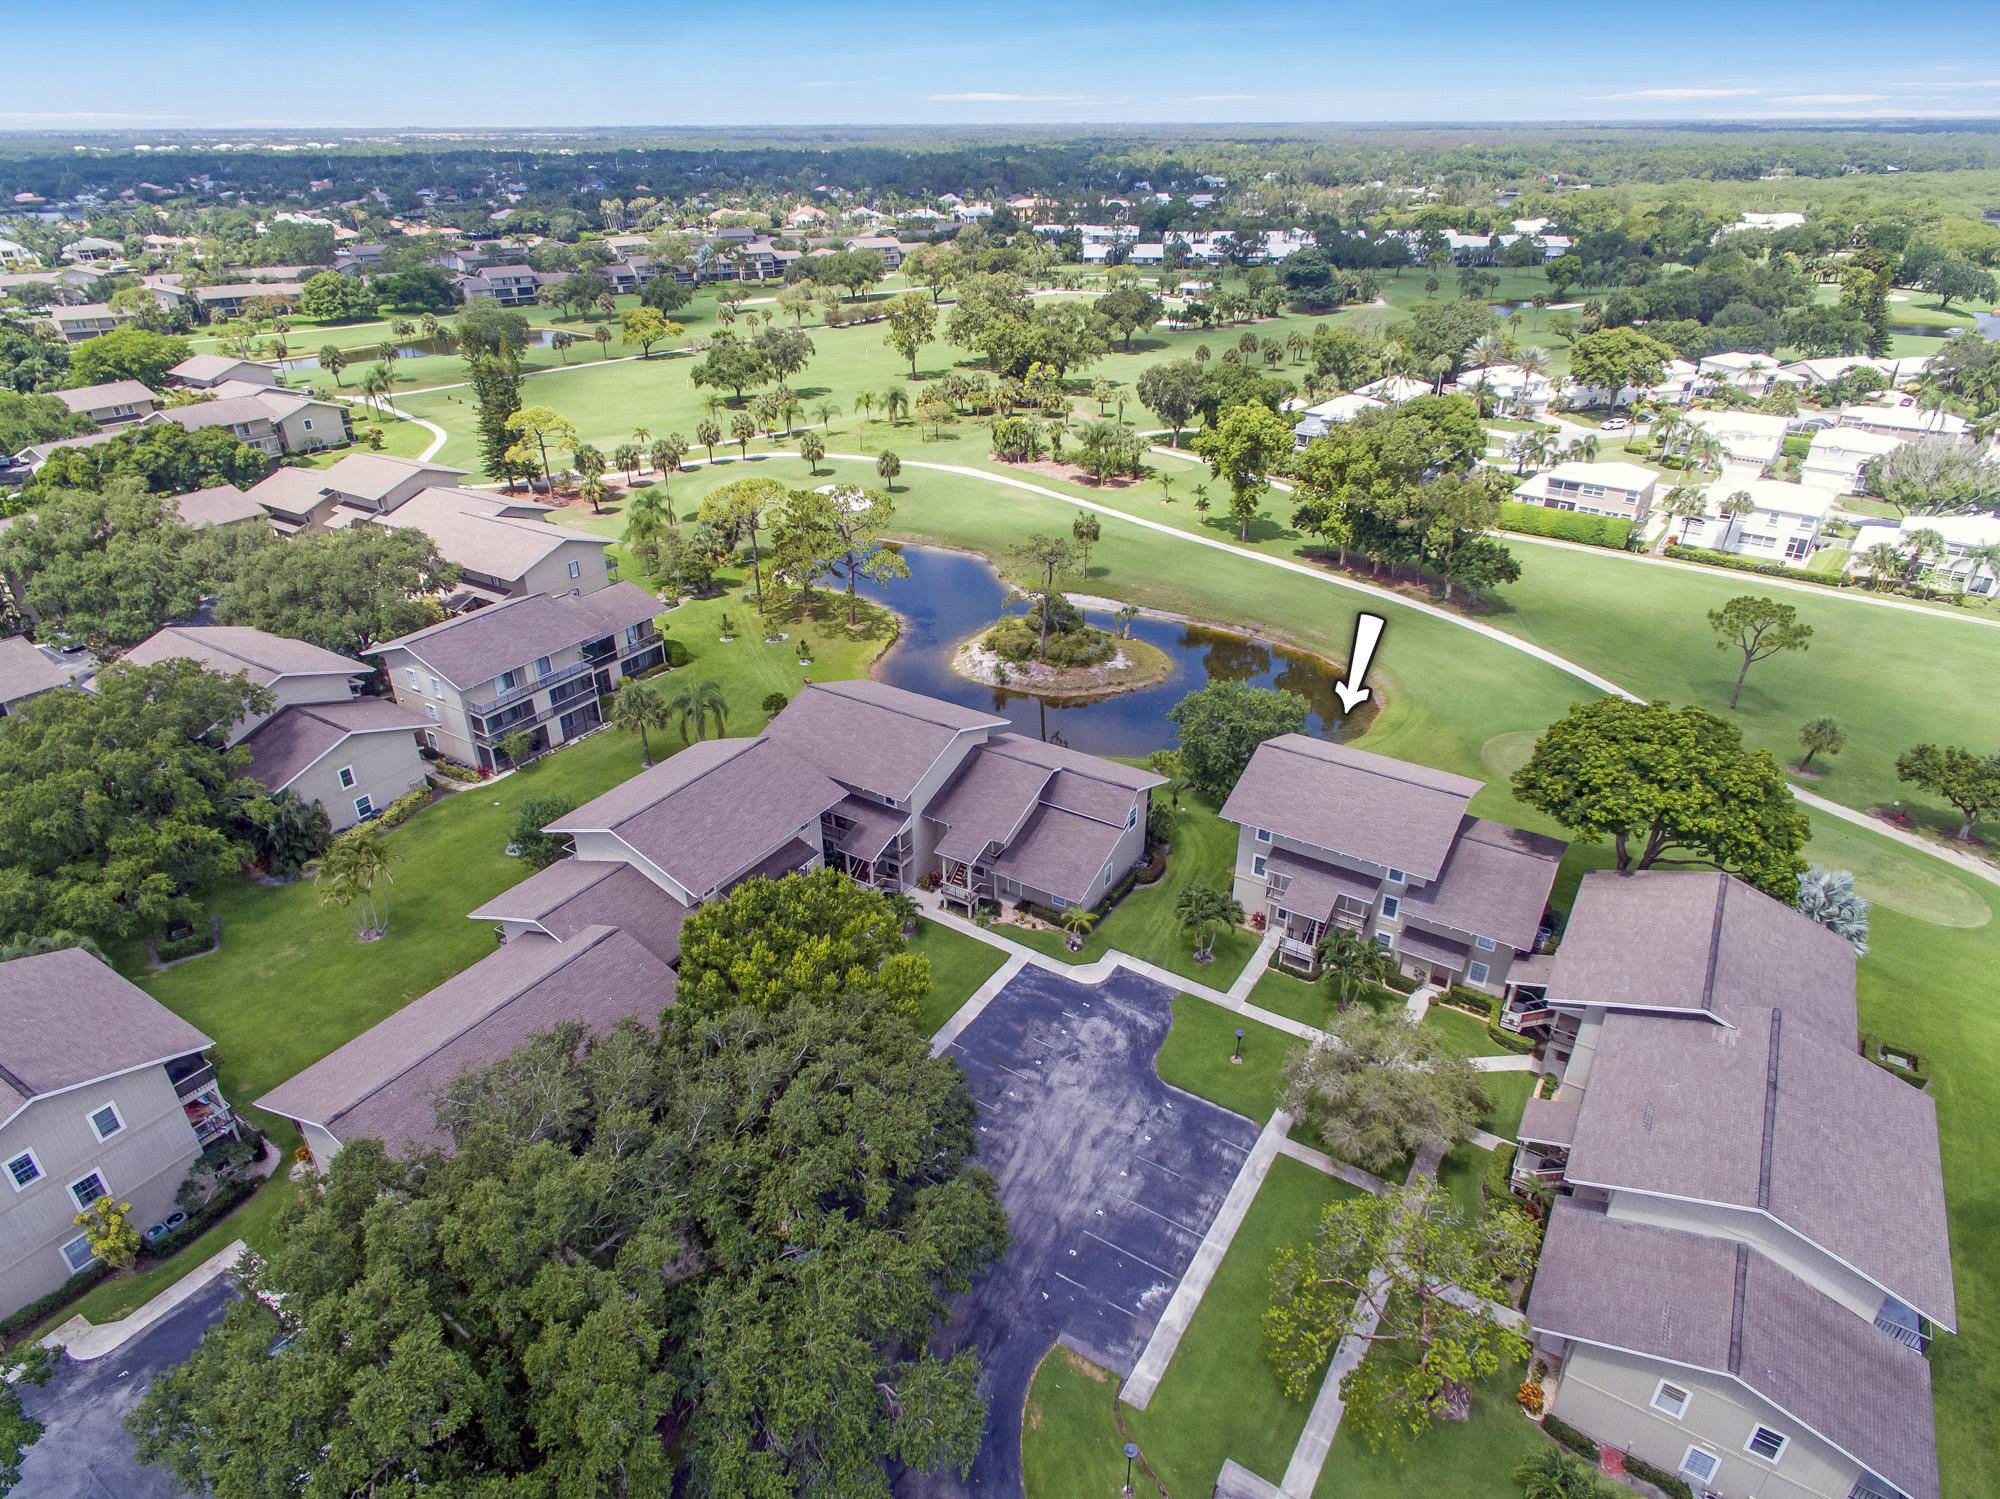 Terrific golf, pond, and sunset views surround this wonderful 2BR 2BA one level condo located on the 18th hole of the Fazio course in the private, waterfront community of Riverbend.